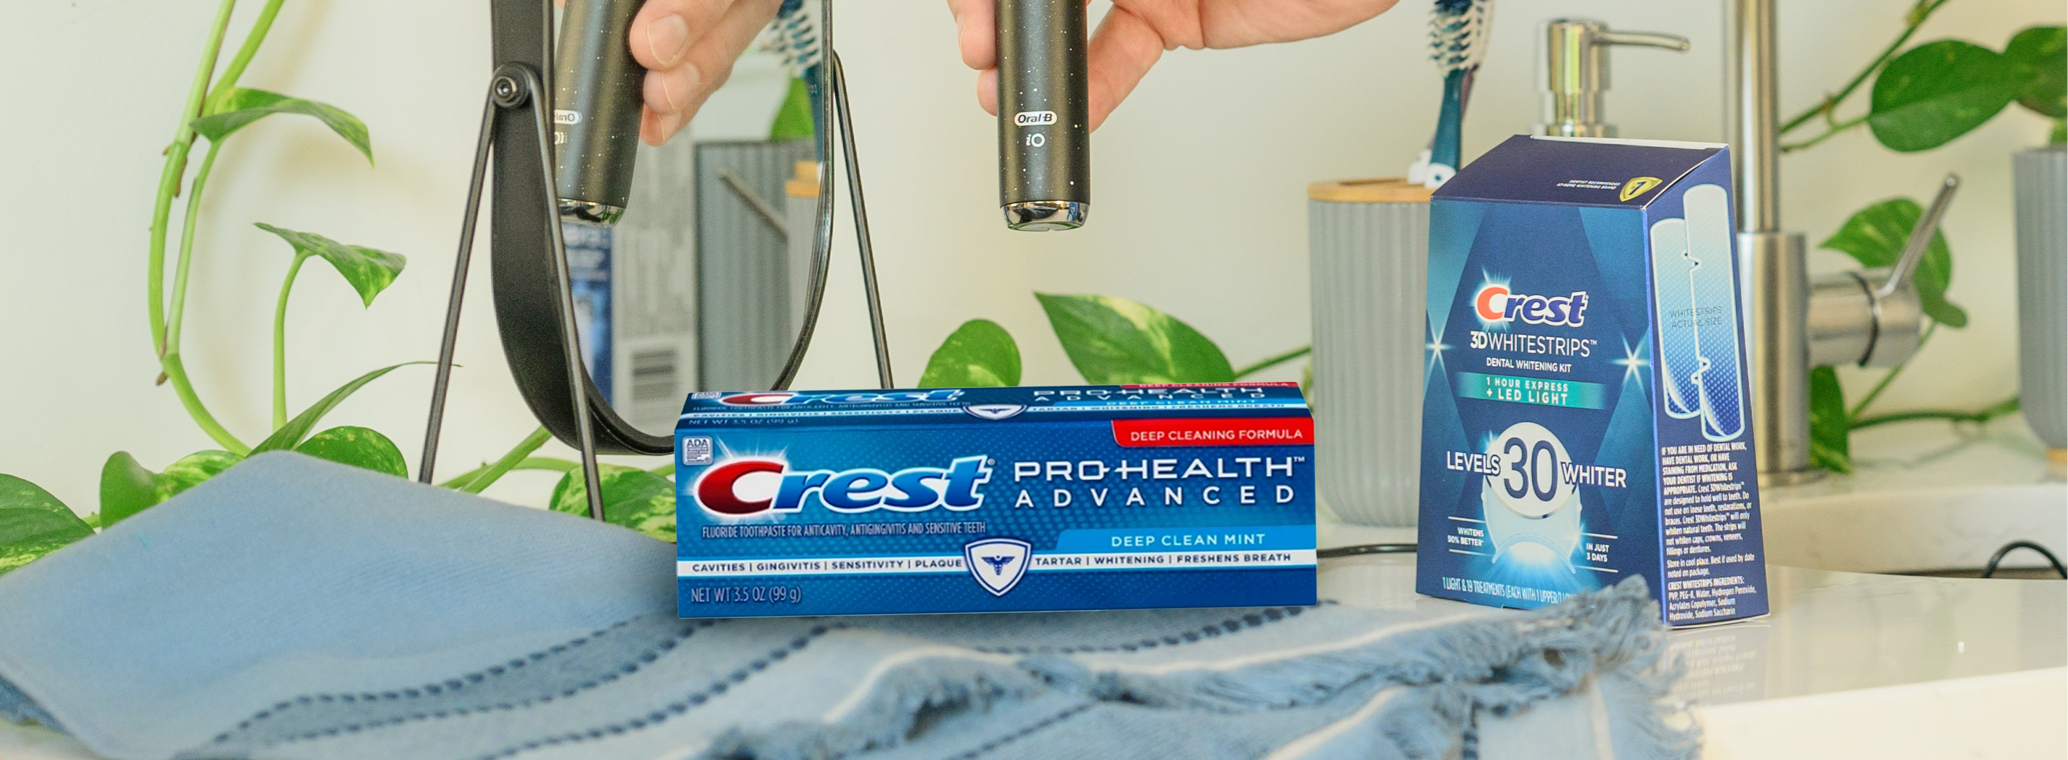 Why Does Crest Pro-Health Toothpaste Feel Gritty?